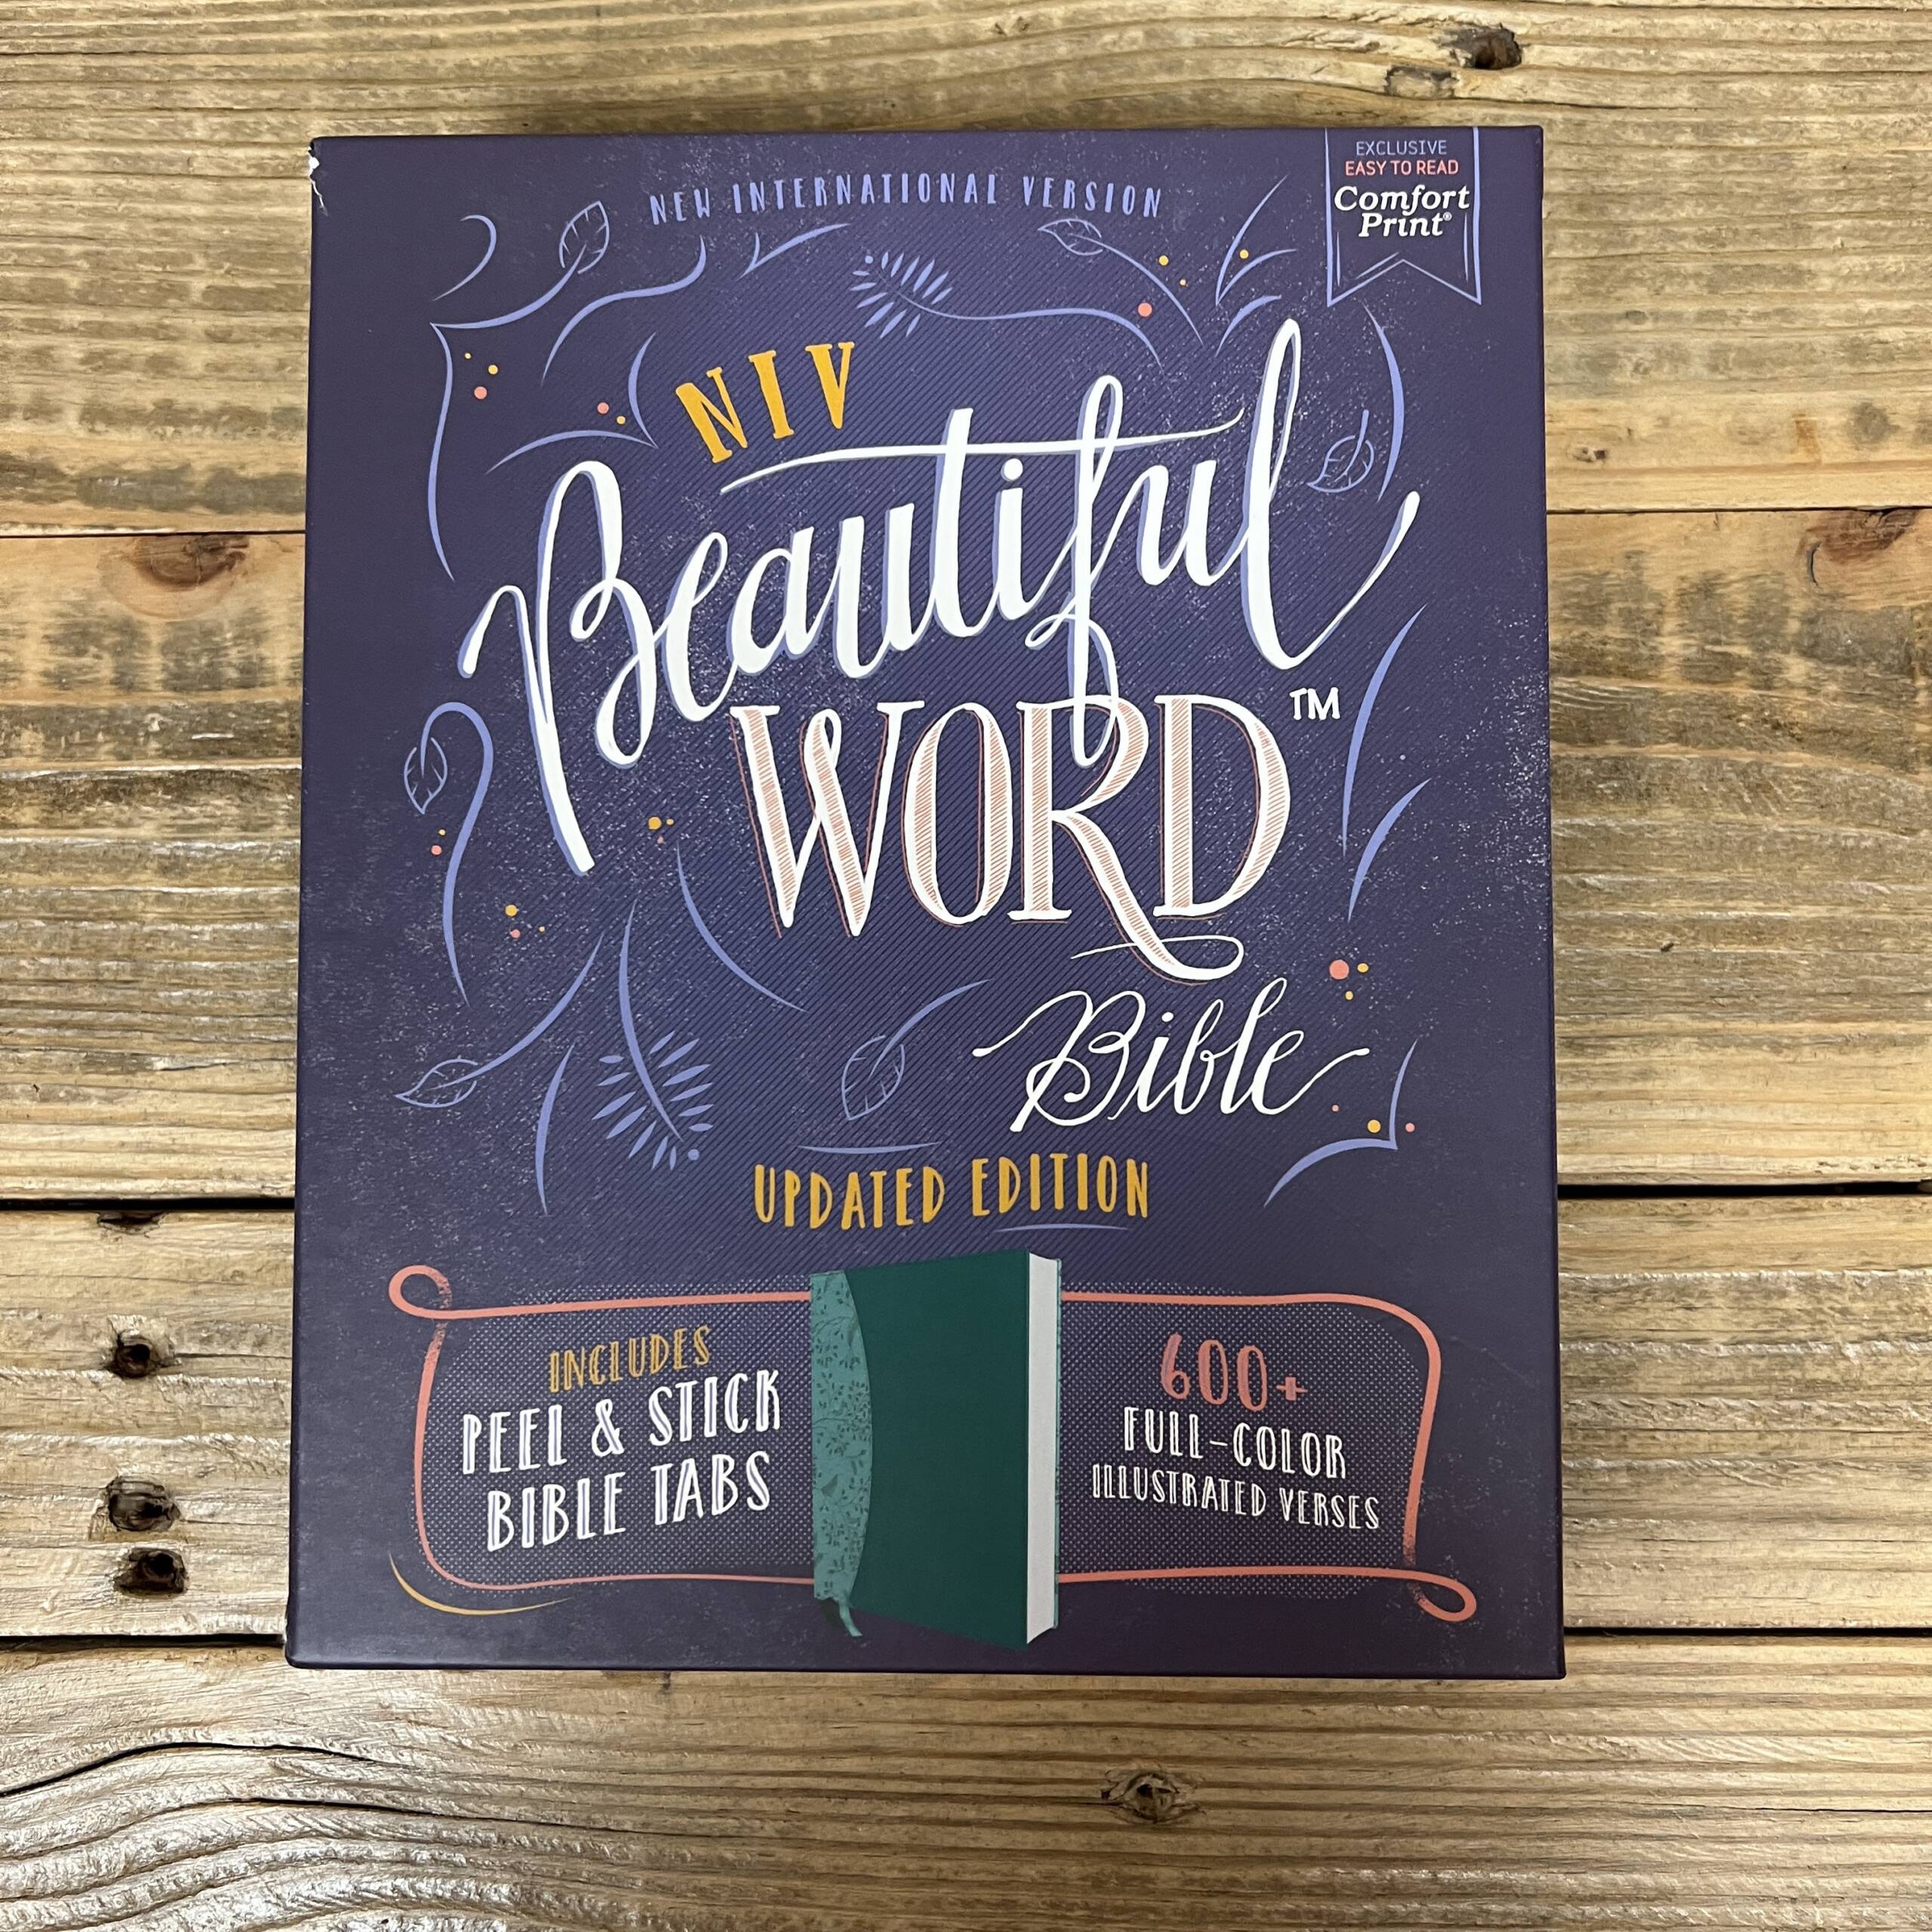 Cloth over Board NIV Floral Peel/Stick Bible Tabs Updated Edition Red Letter Comfort Print: 600+ Full-Color Illustrated Verses Beautiful Word Bible 